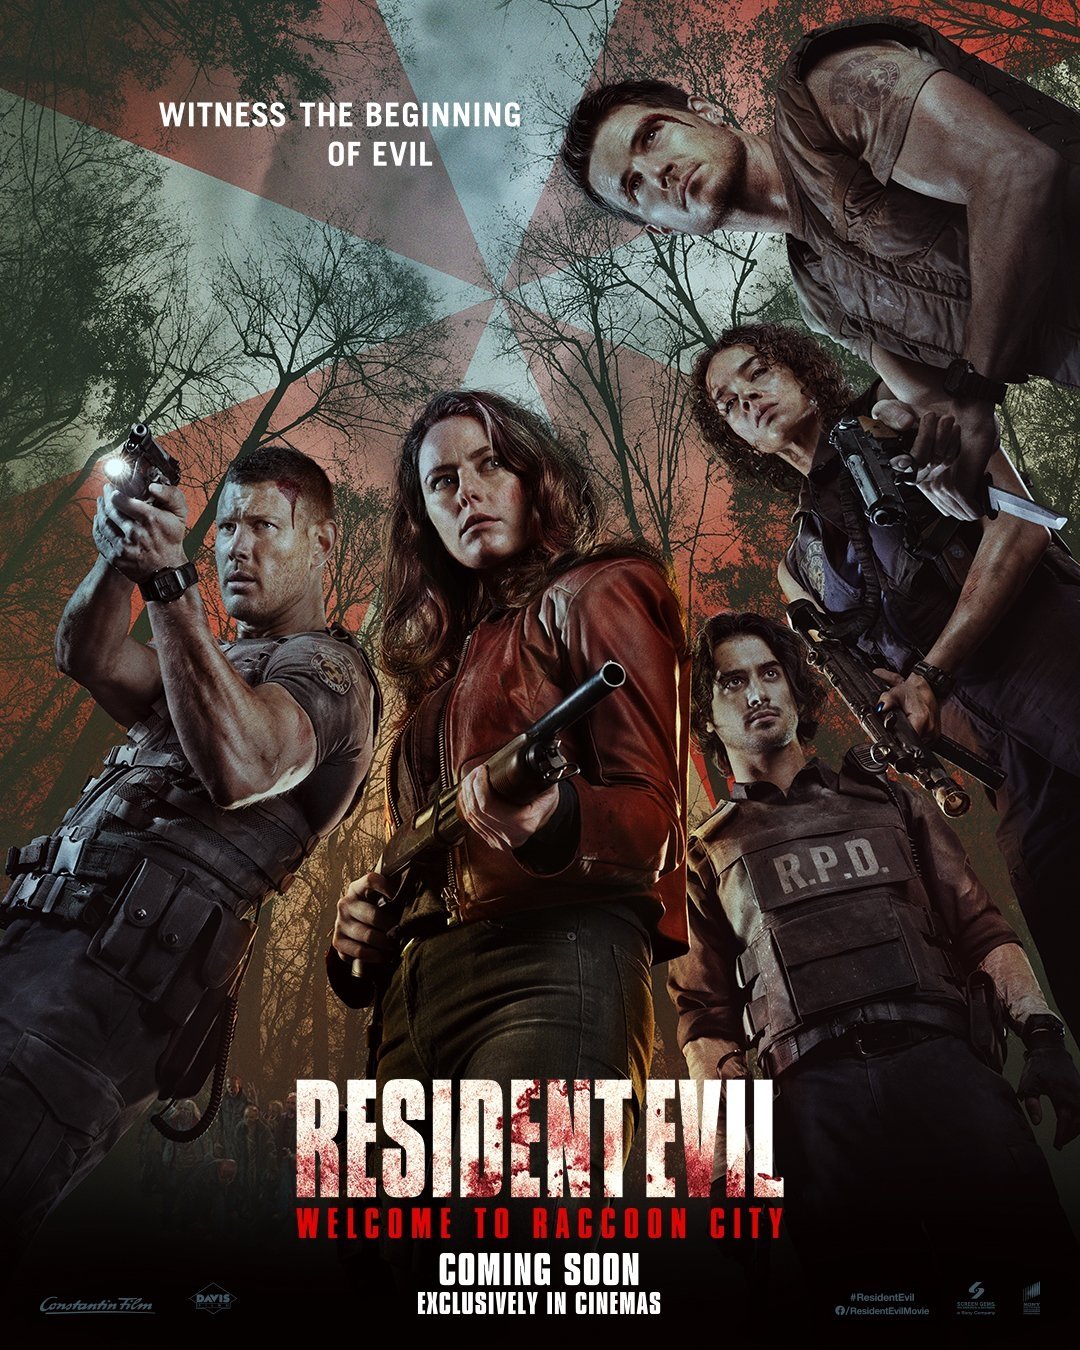 A movie poster for the upcoming live-action Resident Evil: Welcome to Raccoon City film, featuring the main cast of survivors brandishing their firearms and looking nervous but ready for action.